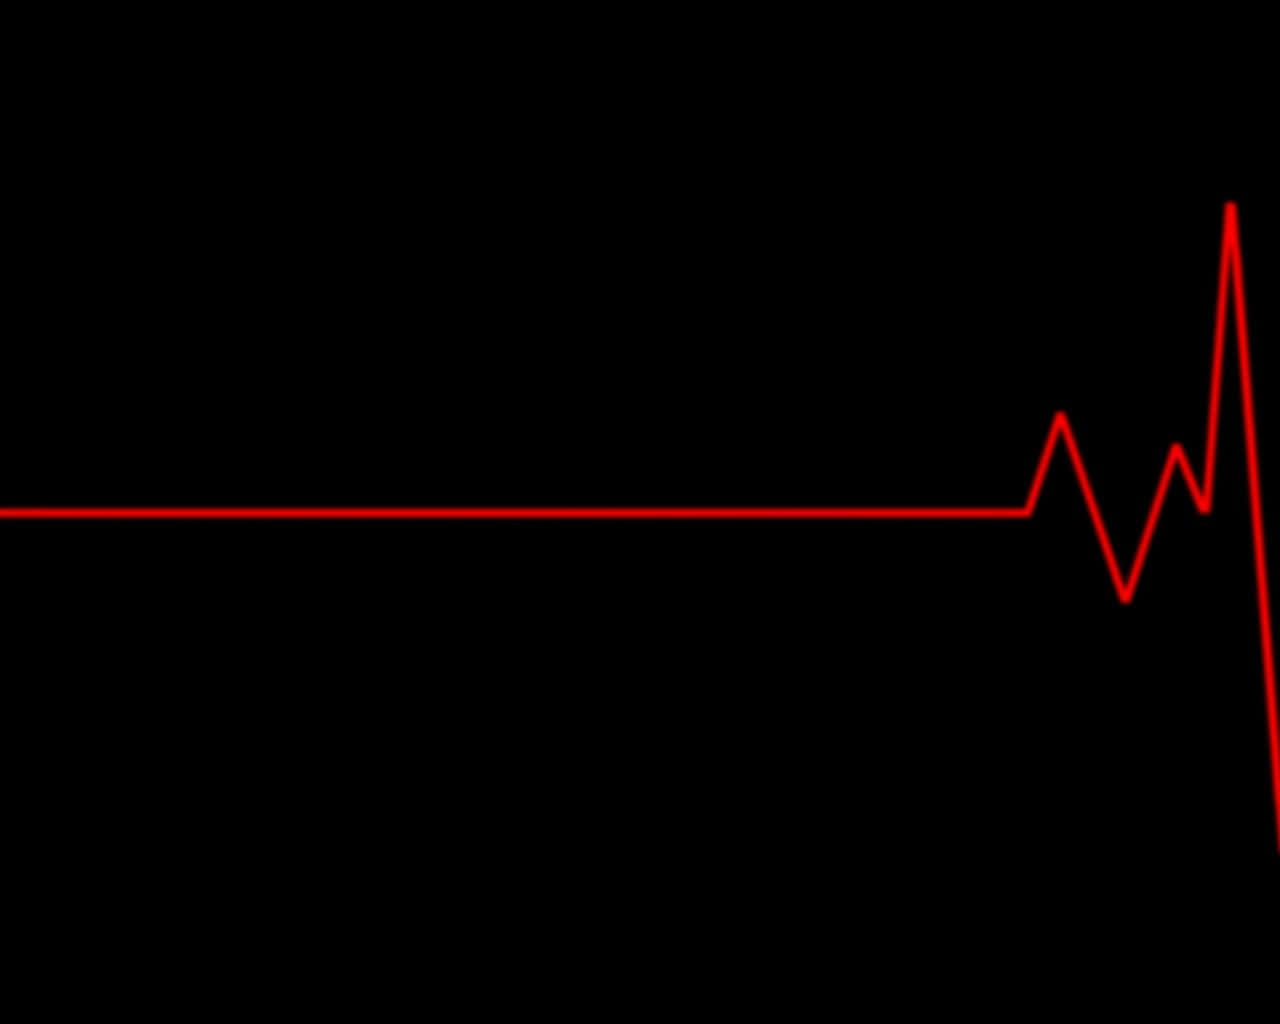 "Monitor Your Heartbeat" Wallpaper